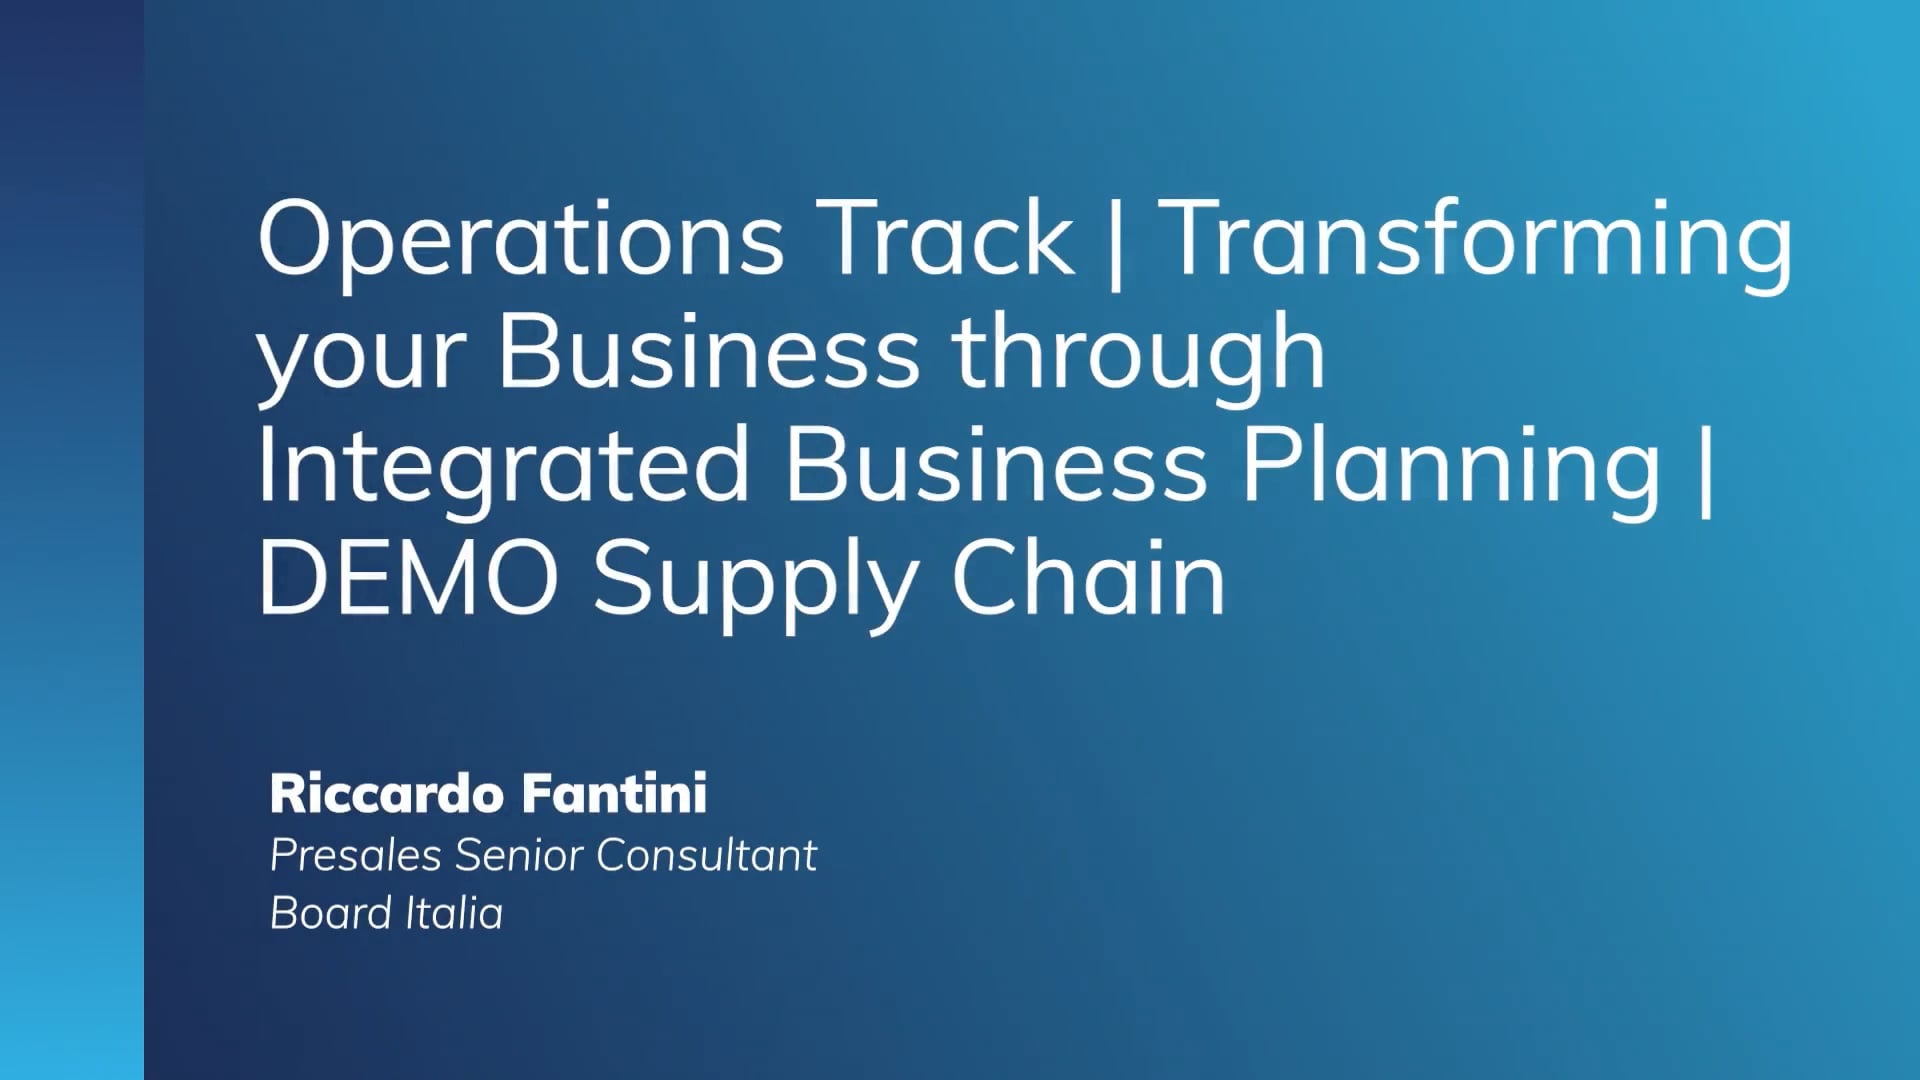 Operations Track | Transforming your Business through Integrated Business Planning | DEMO Supply Chain